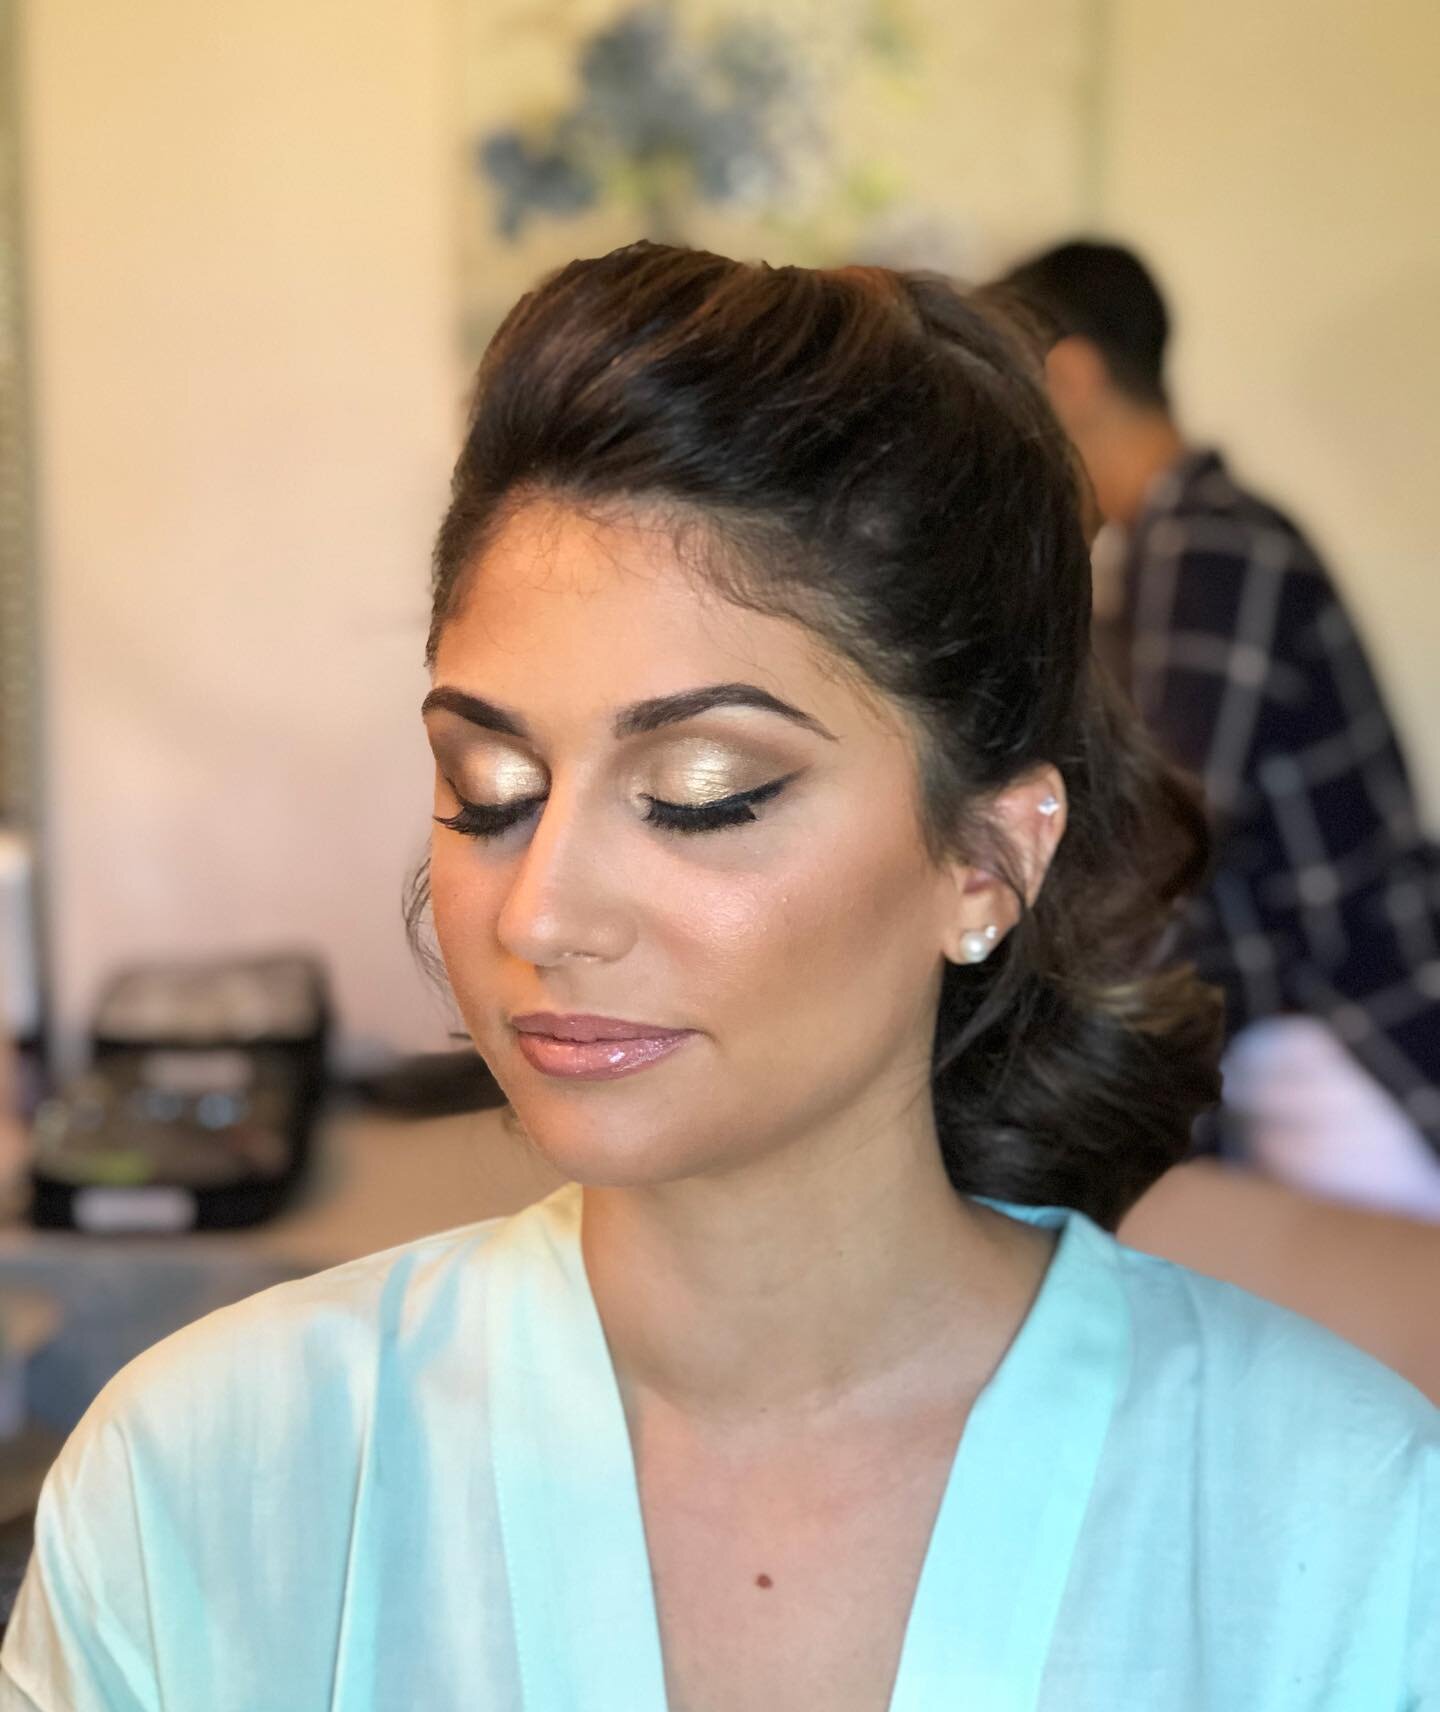 After about a year of having nowhere to go, I&rsquo;m loving this wave of getting glammed up for date nights, attending events/weddings or even for a bday brunch! We all deserve to feel cute 🤍 
How do we like this glistening lid, smoky wing liner, n